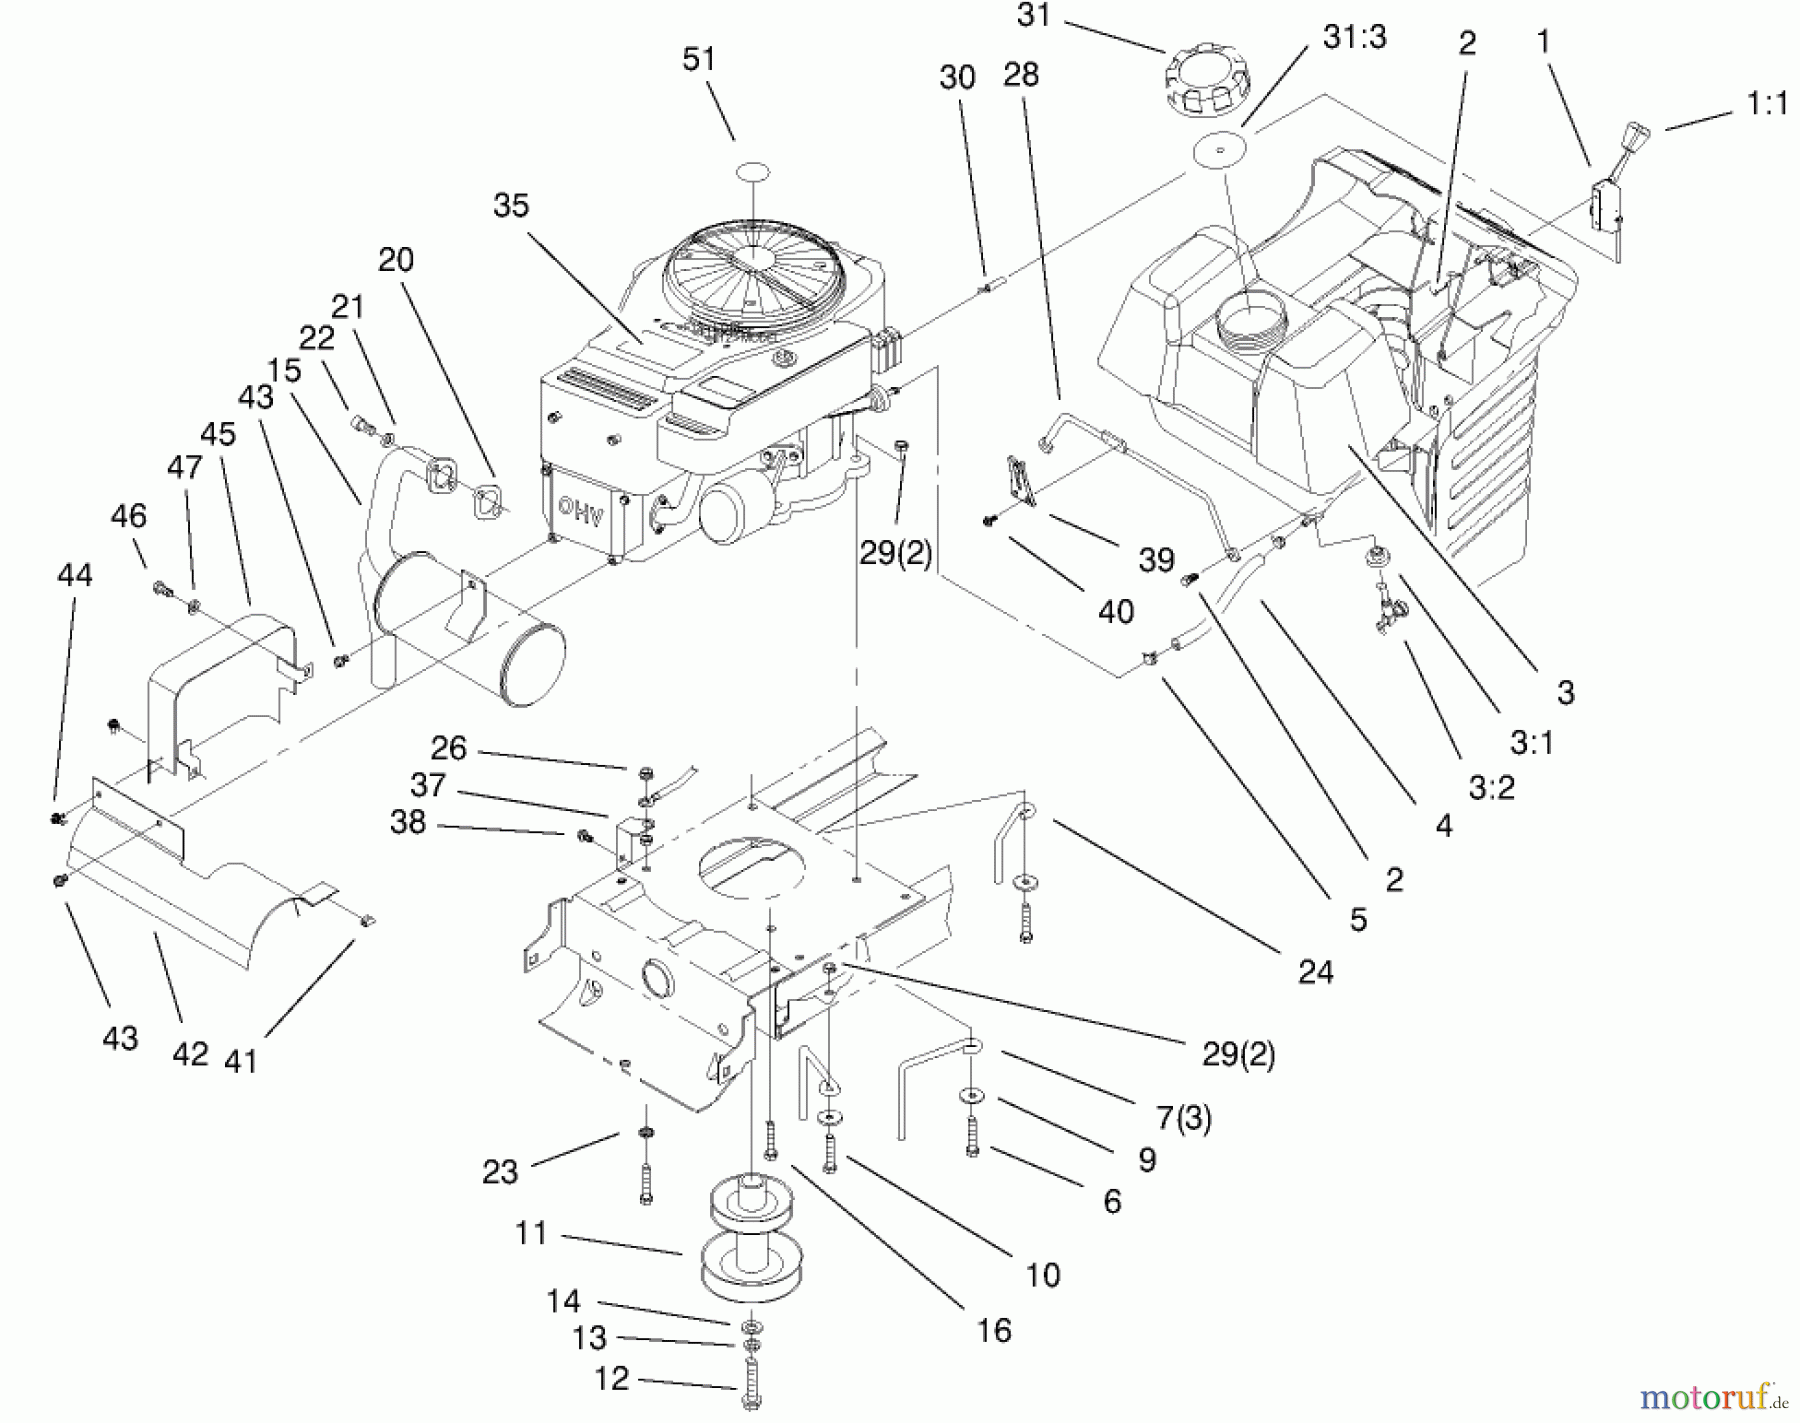  Toro Neu Mowers, Lawn & Garden Tractor Seite 1 77102 (16-38G) - Toro 16-38G Lawn Tractor, 2000 (200000001-200999999) ENGINE SYSTEMS COMPONENTS ASSEMBLY